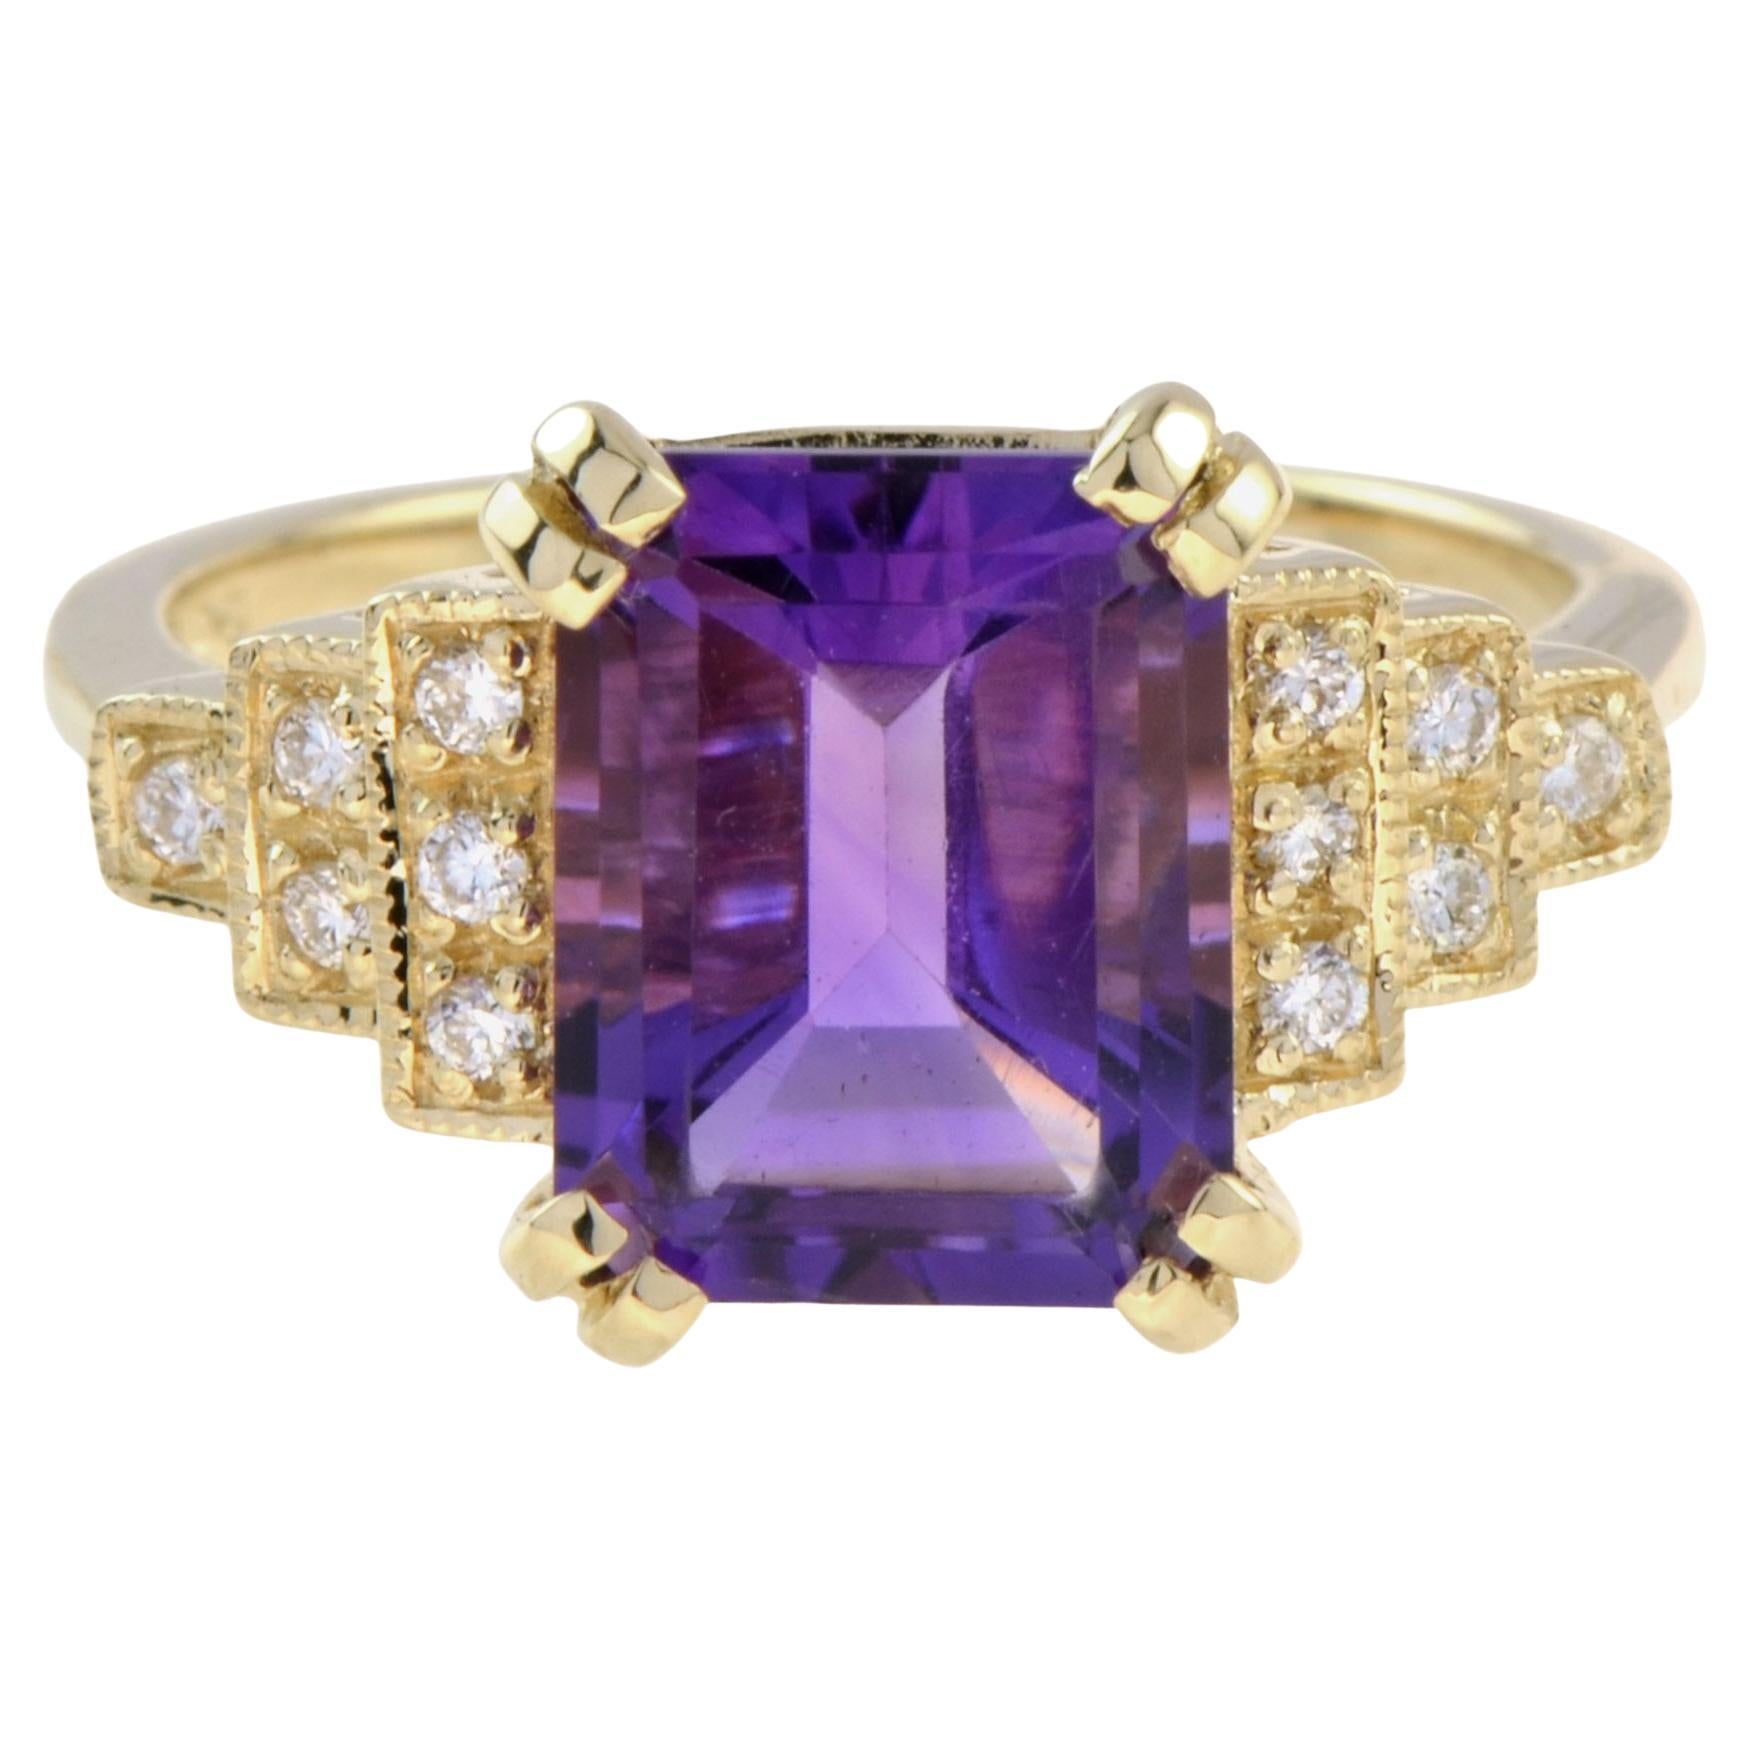 For Sale:  Emerald Cut Amethyst and Diamond Step Shoulder Engagement Ring in 14K Gold